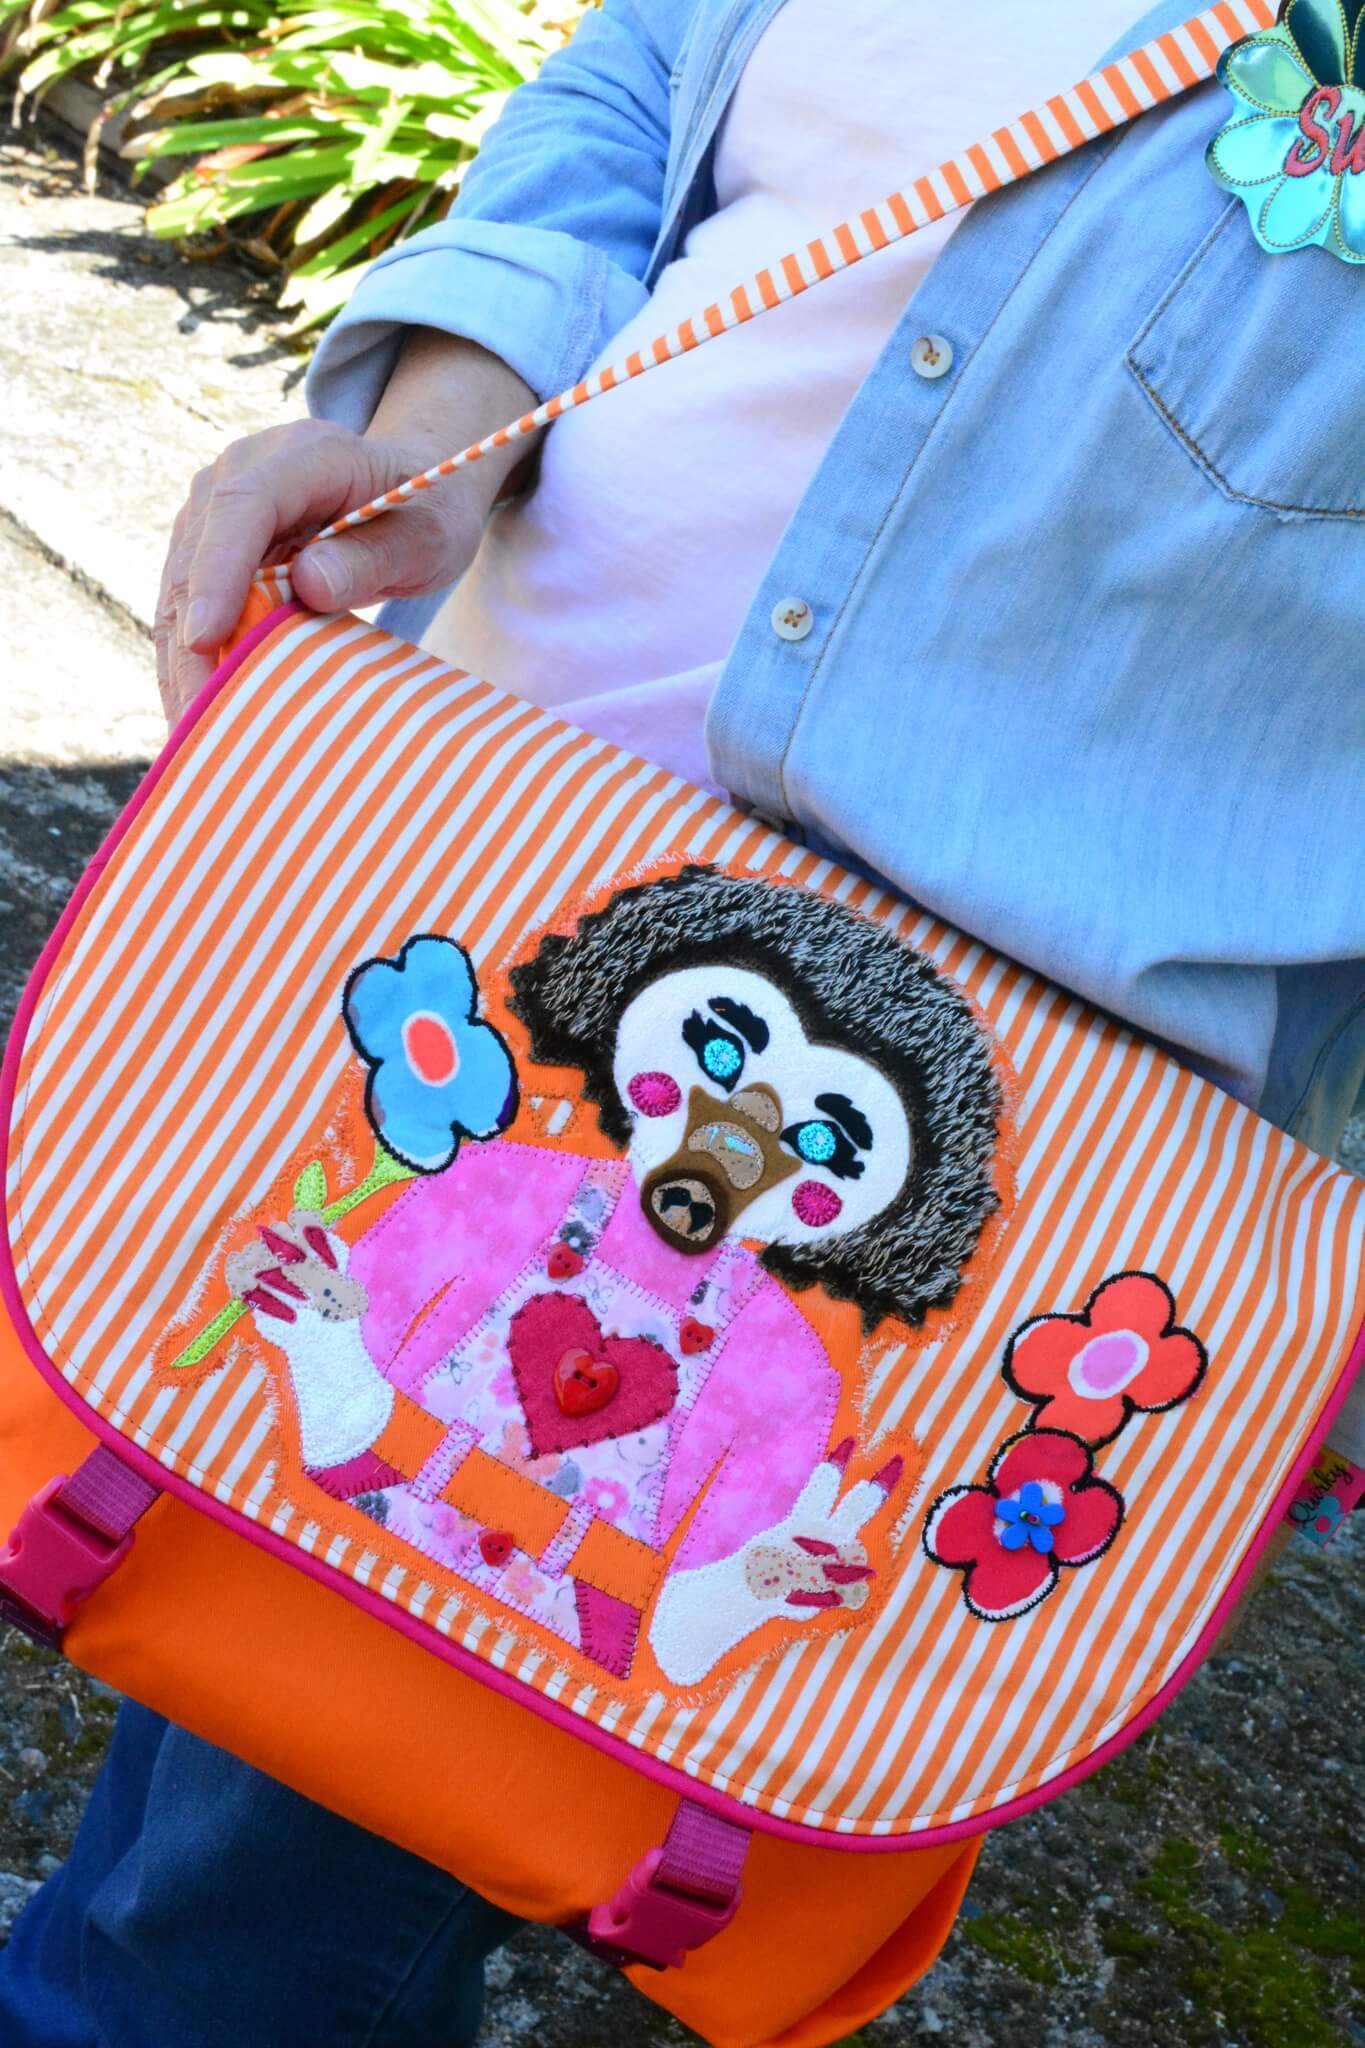 Flora The Echidna applique by Sew Quirky, bag made at Quirky Moo Retreat by Sue Hulin 